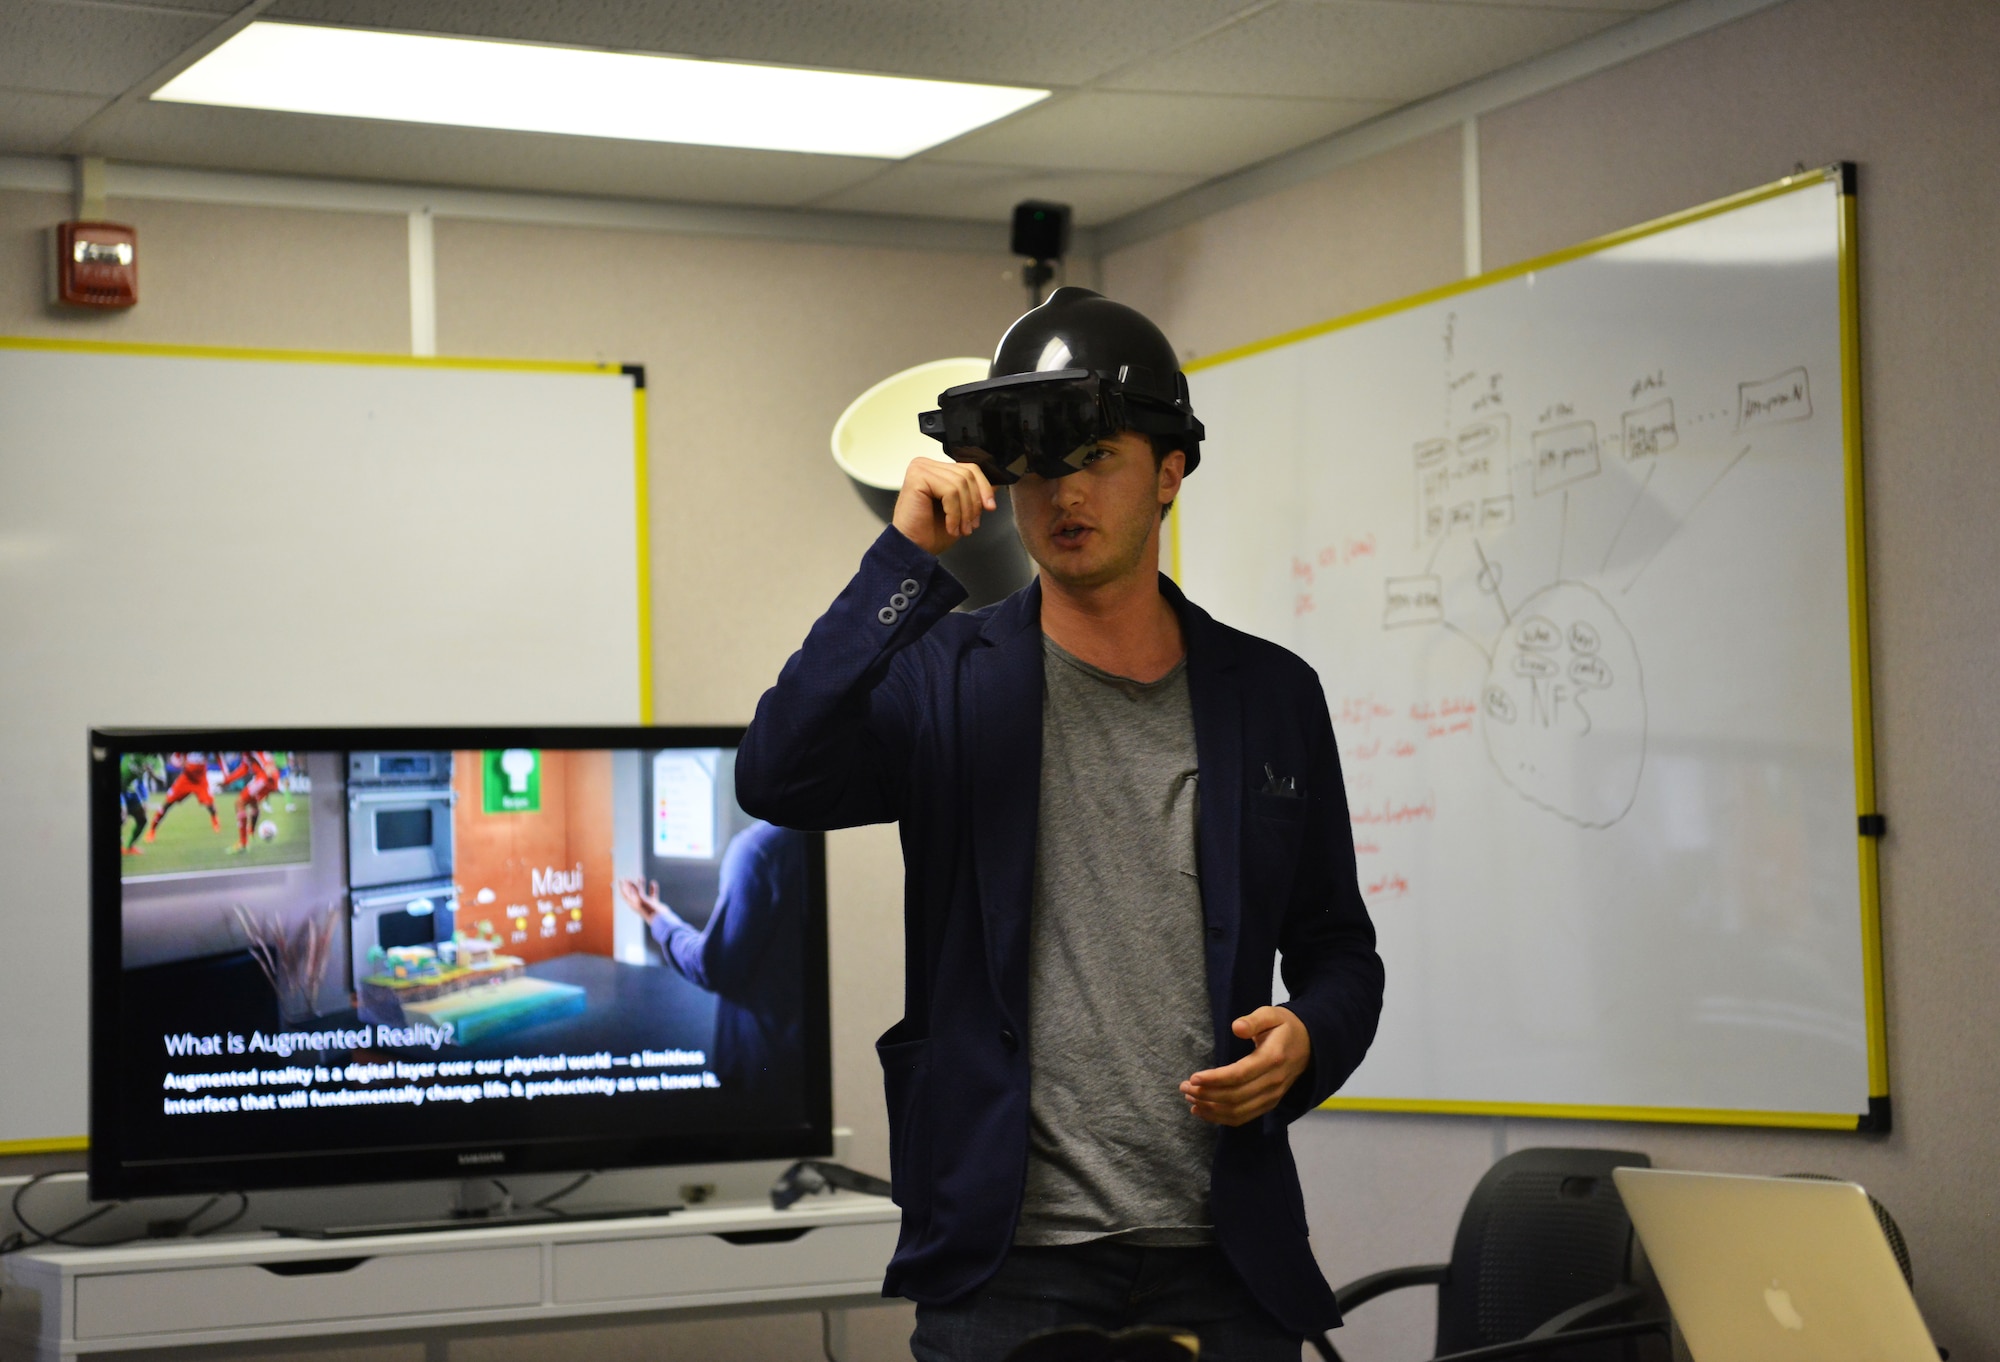 One of the innovating startup representatives wears a hard hat with see-through VR goggles that help to display a digital work center that can assist with working in a busy environment.